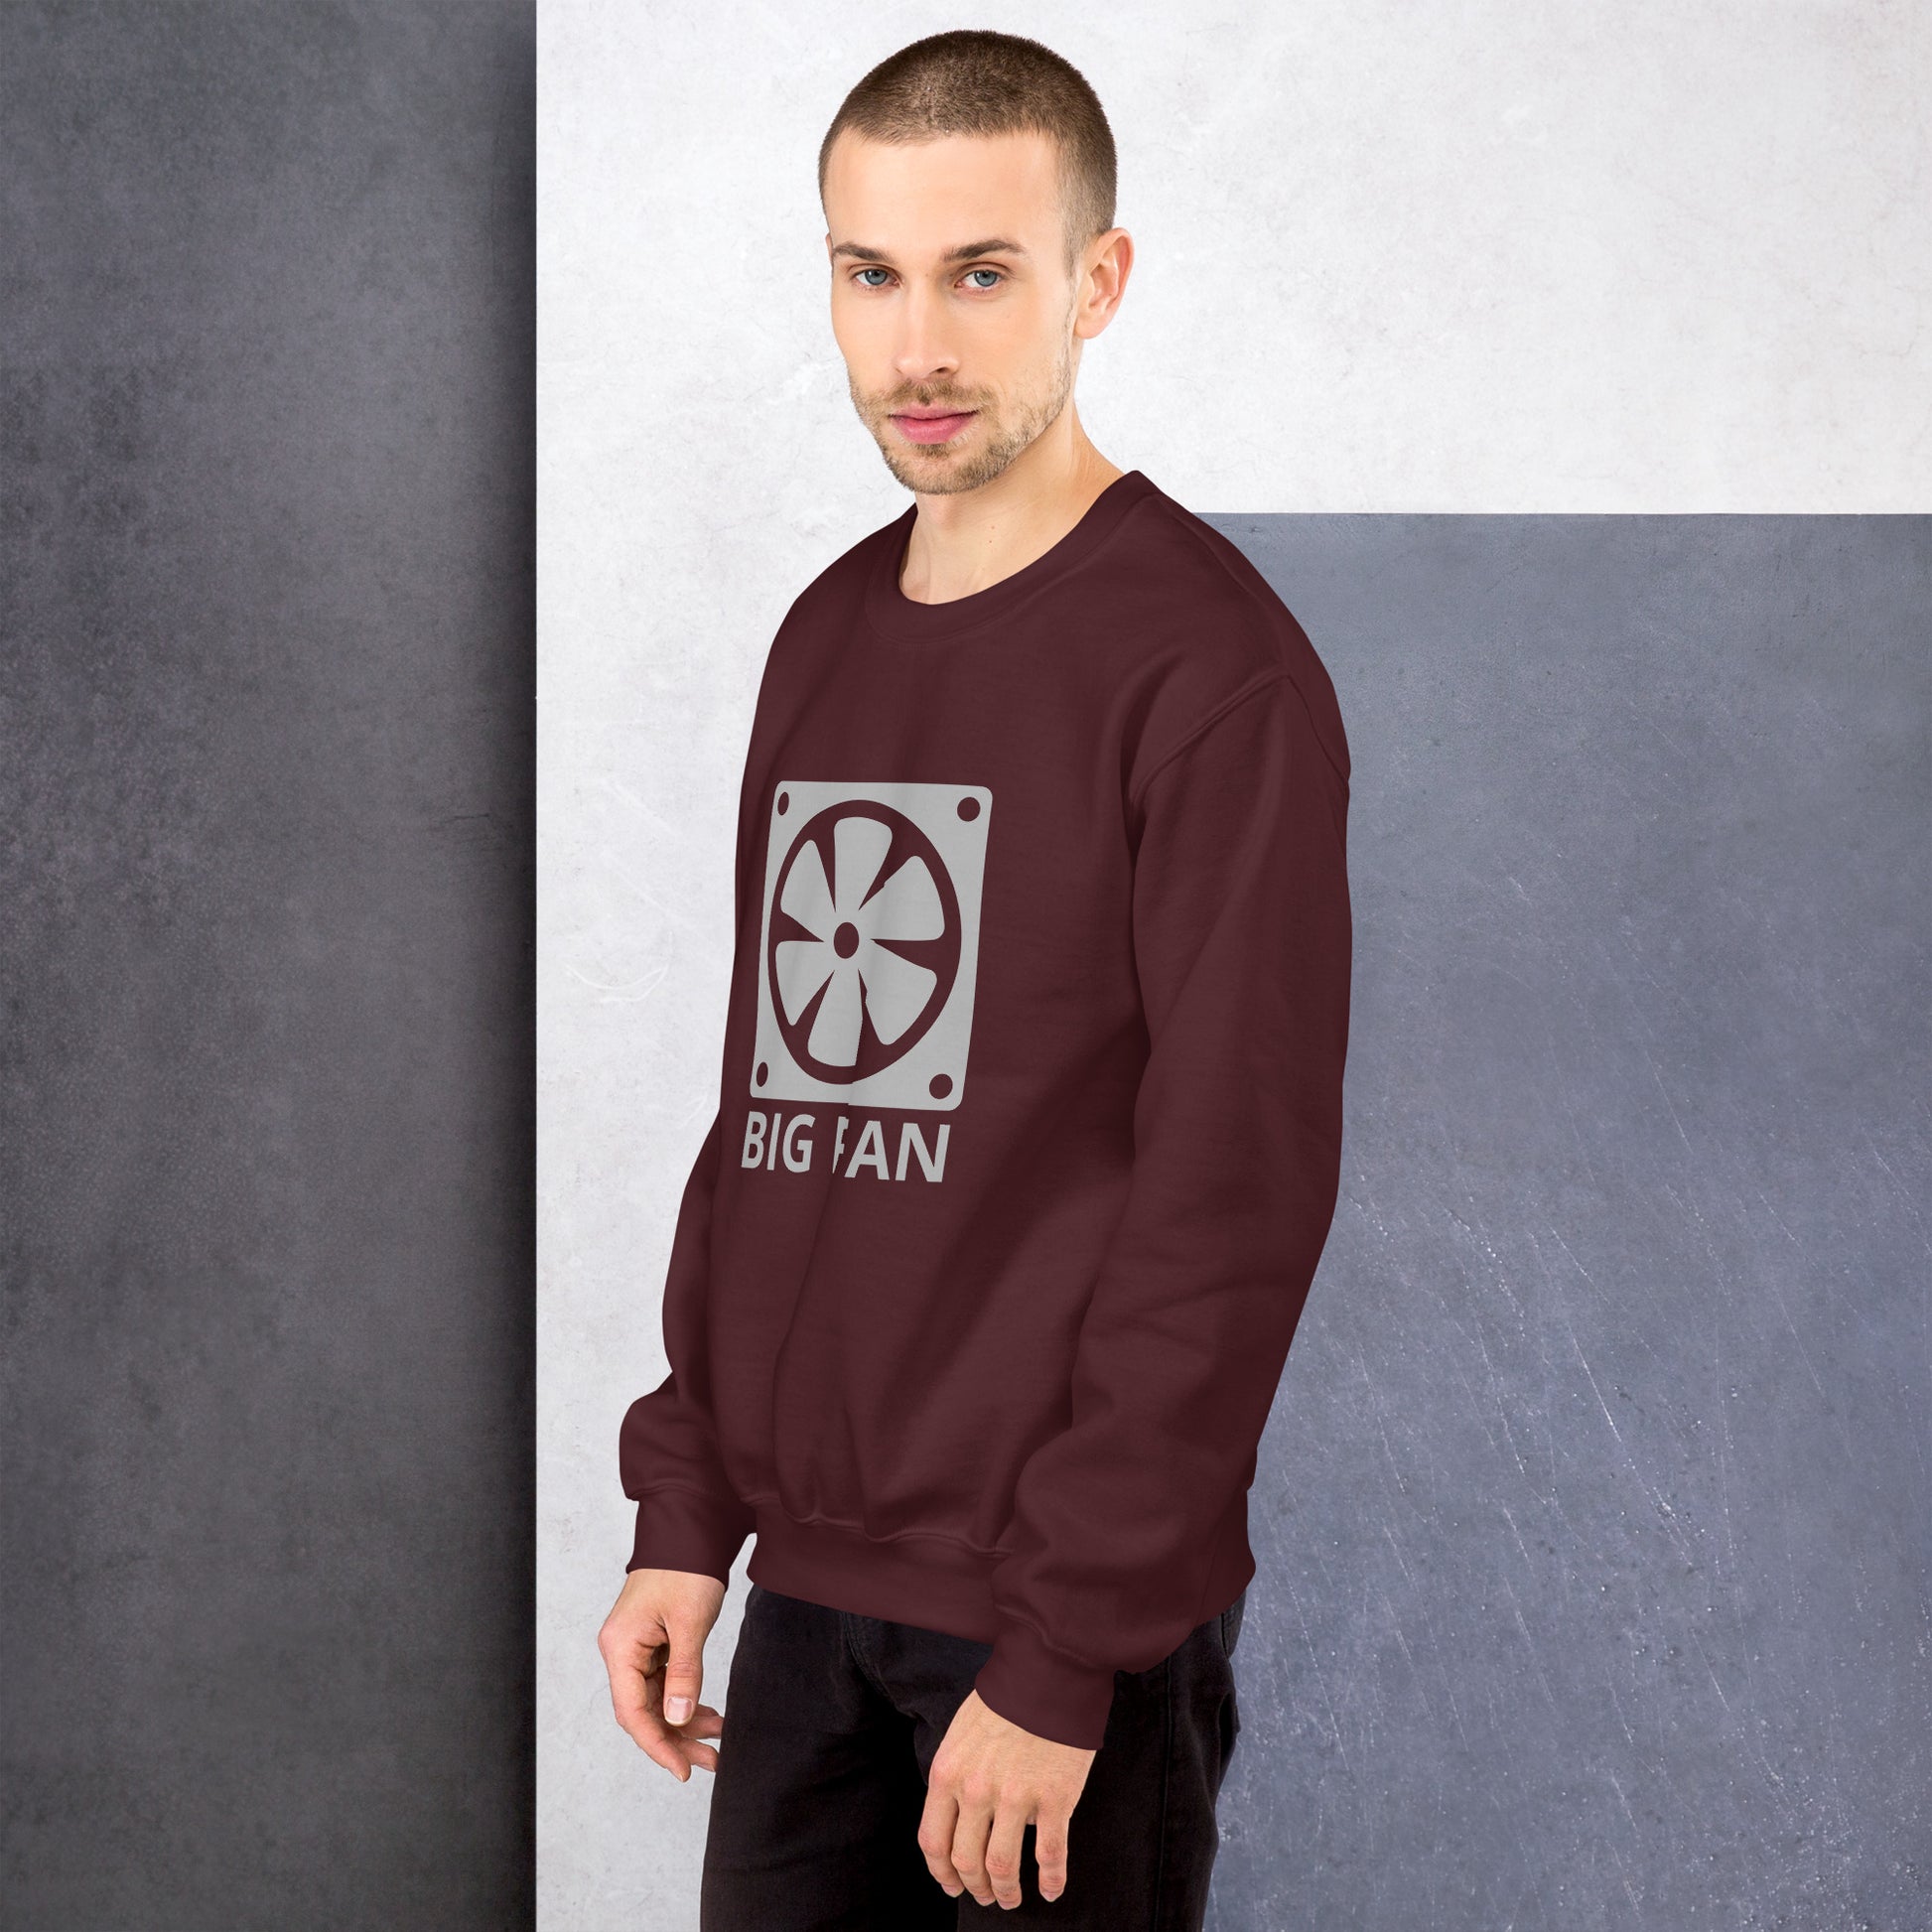 Men with maroon sweatshirt with image of a big computer fan and the text "BIG FAN"